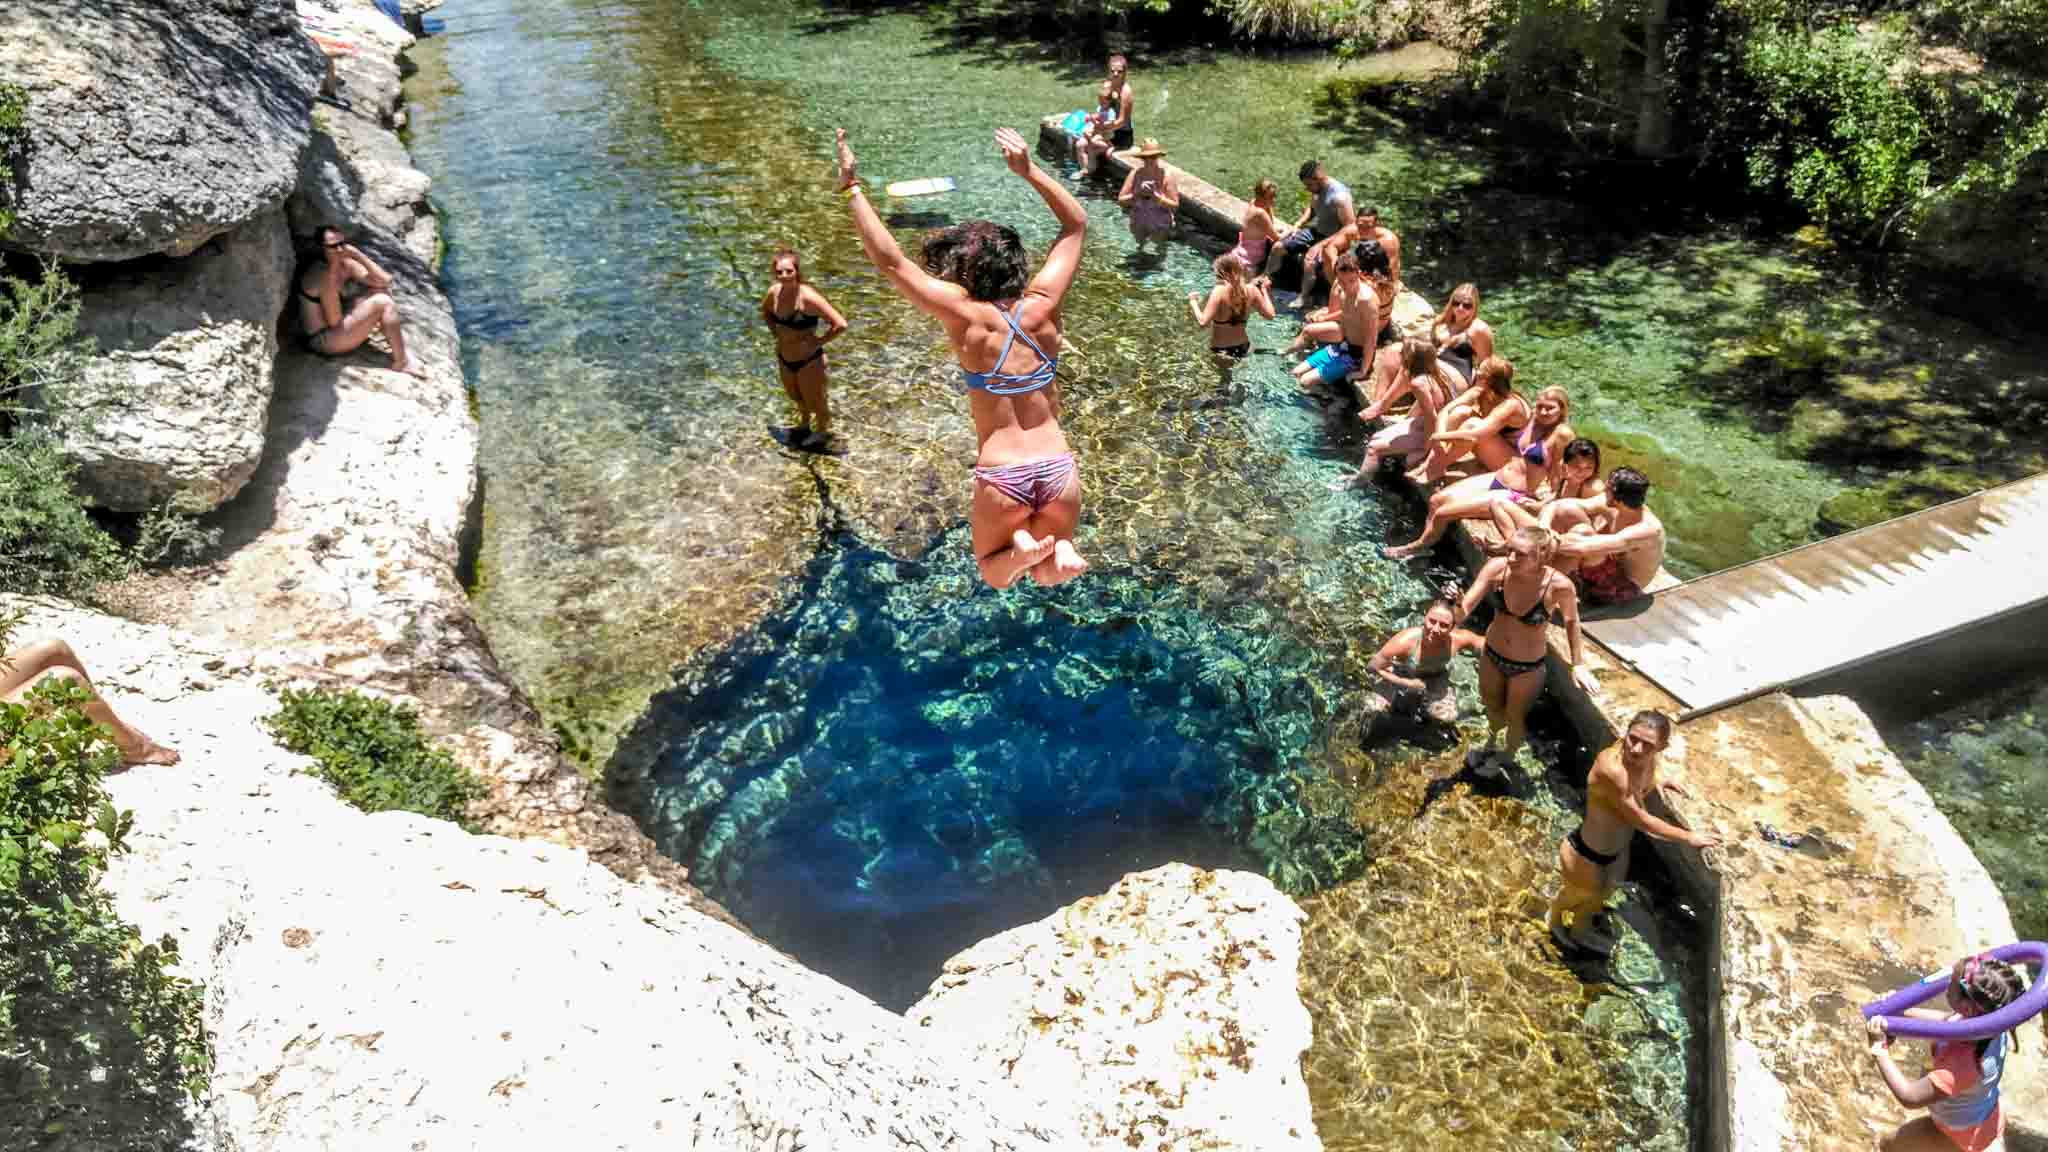 Woman jumping into the Jacob's Well swimming hole while people look on